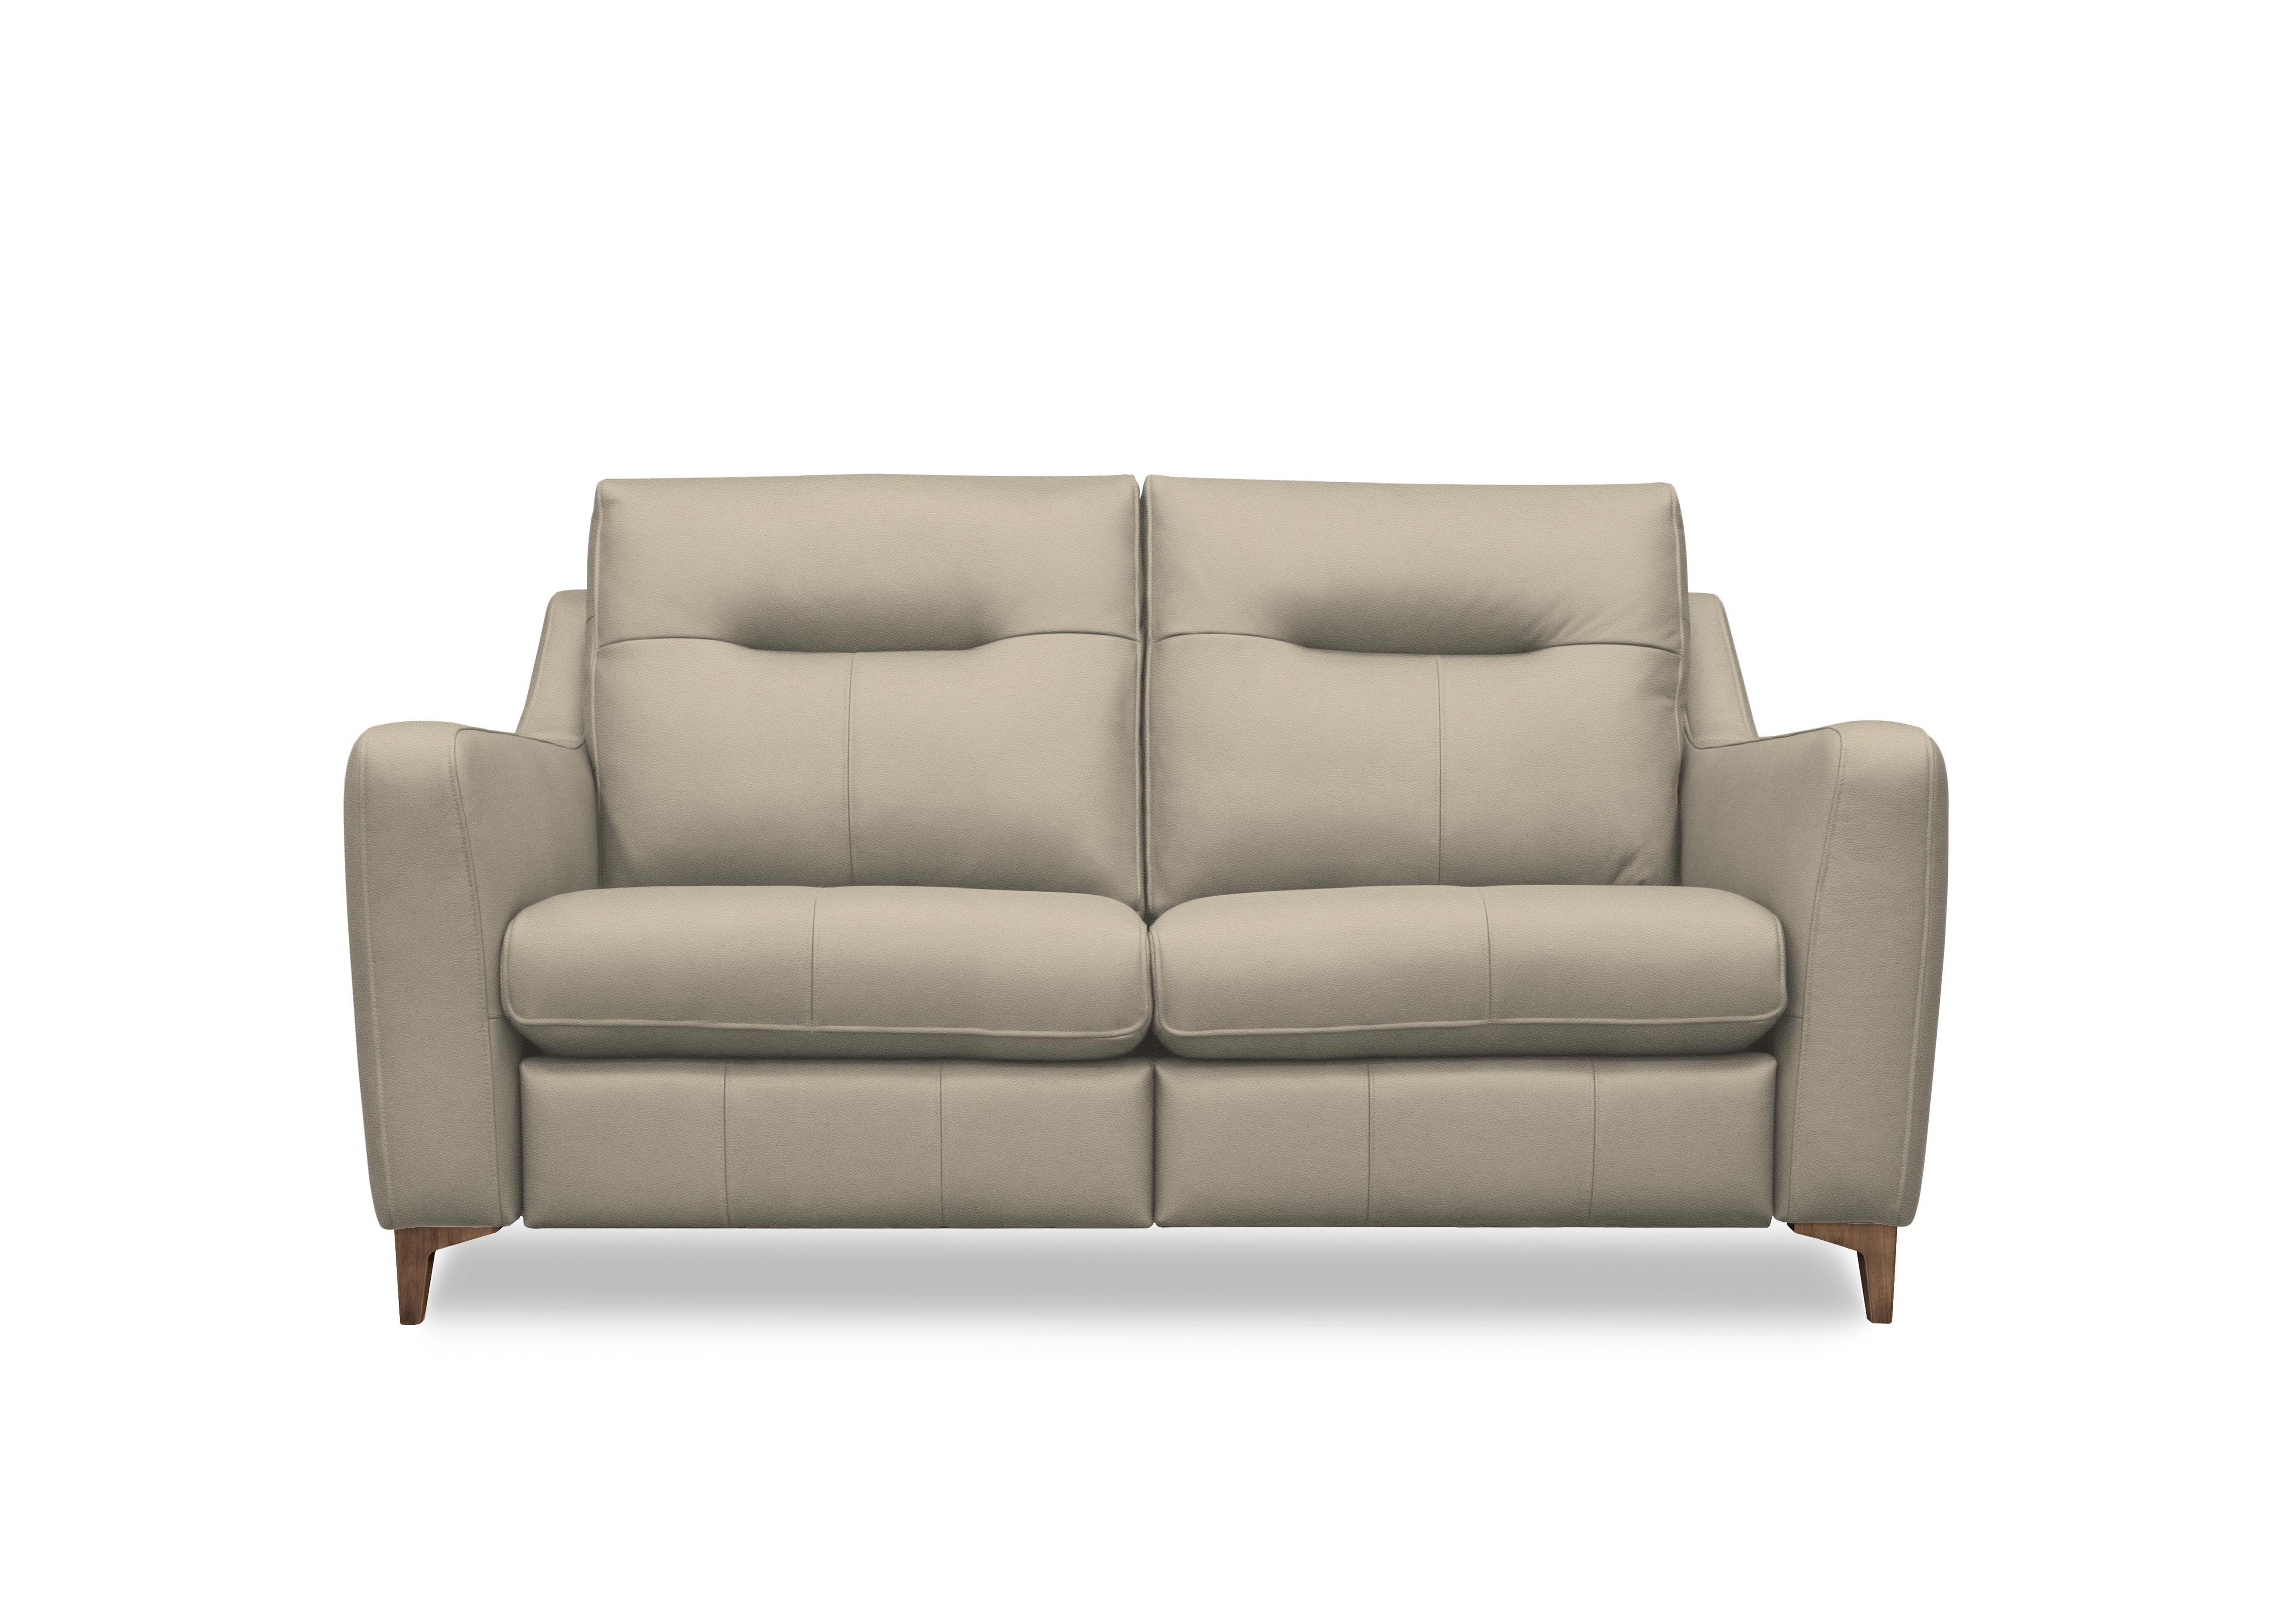 Arlo 2 Seater Leather Sofa in H001 Oxford Mushroom Wal Ft on Furniture Village